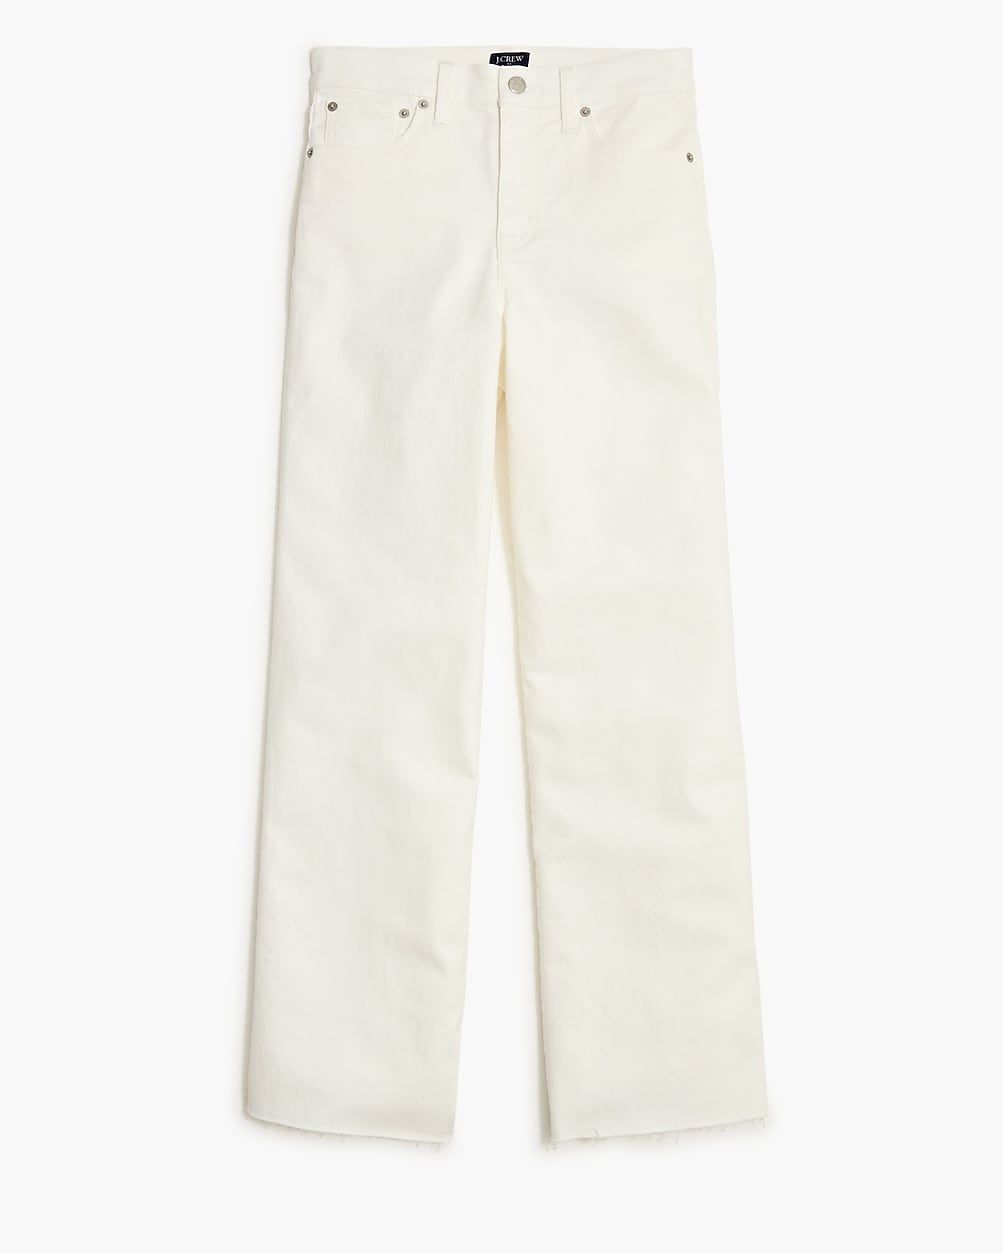 Wide-leg jean in all-day stretch | J.Crew Factory